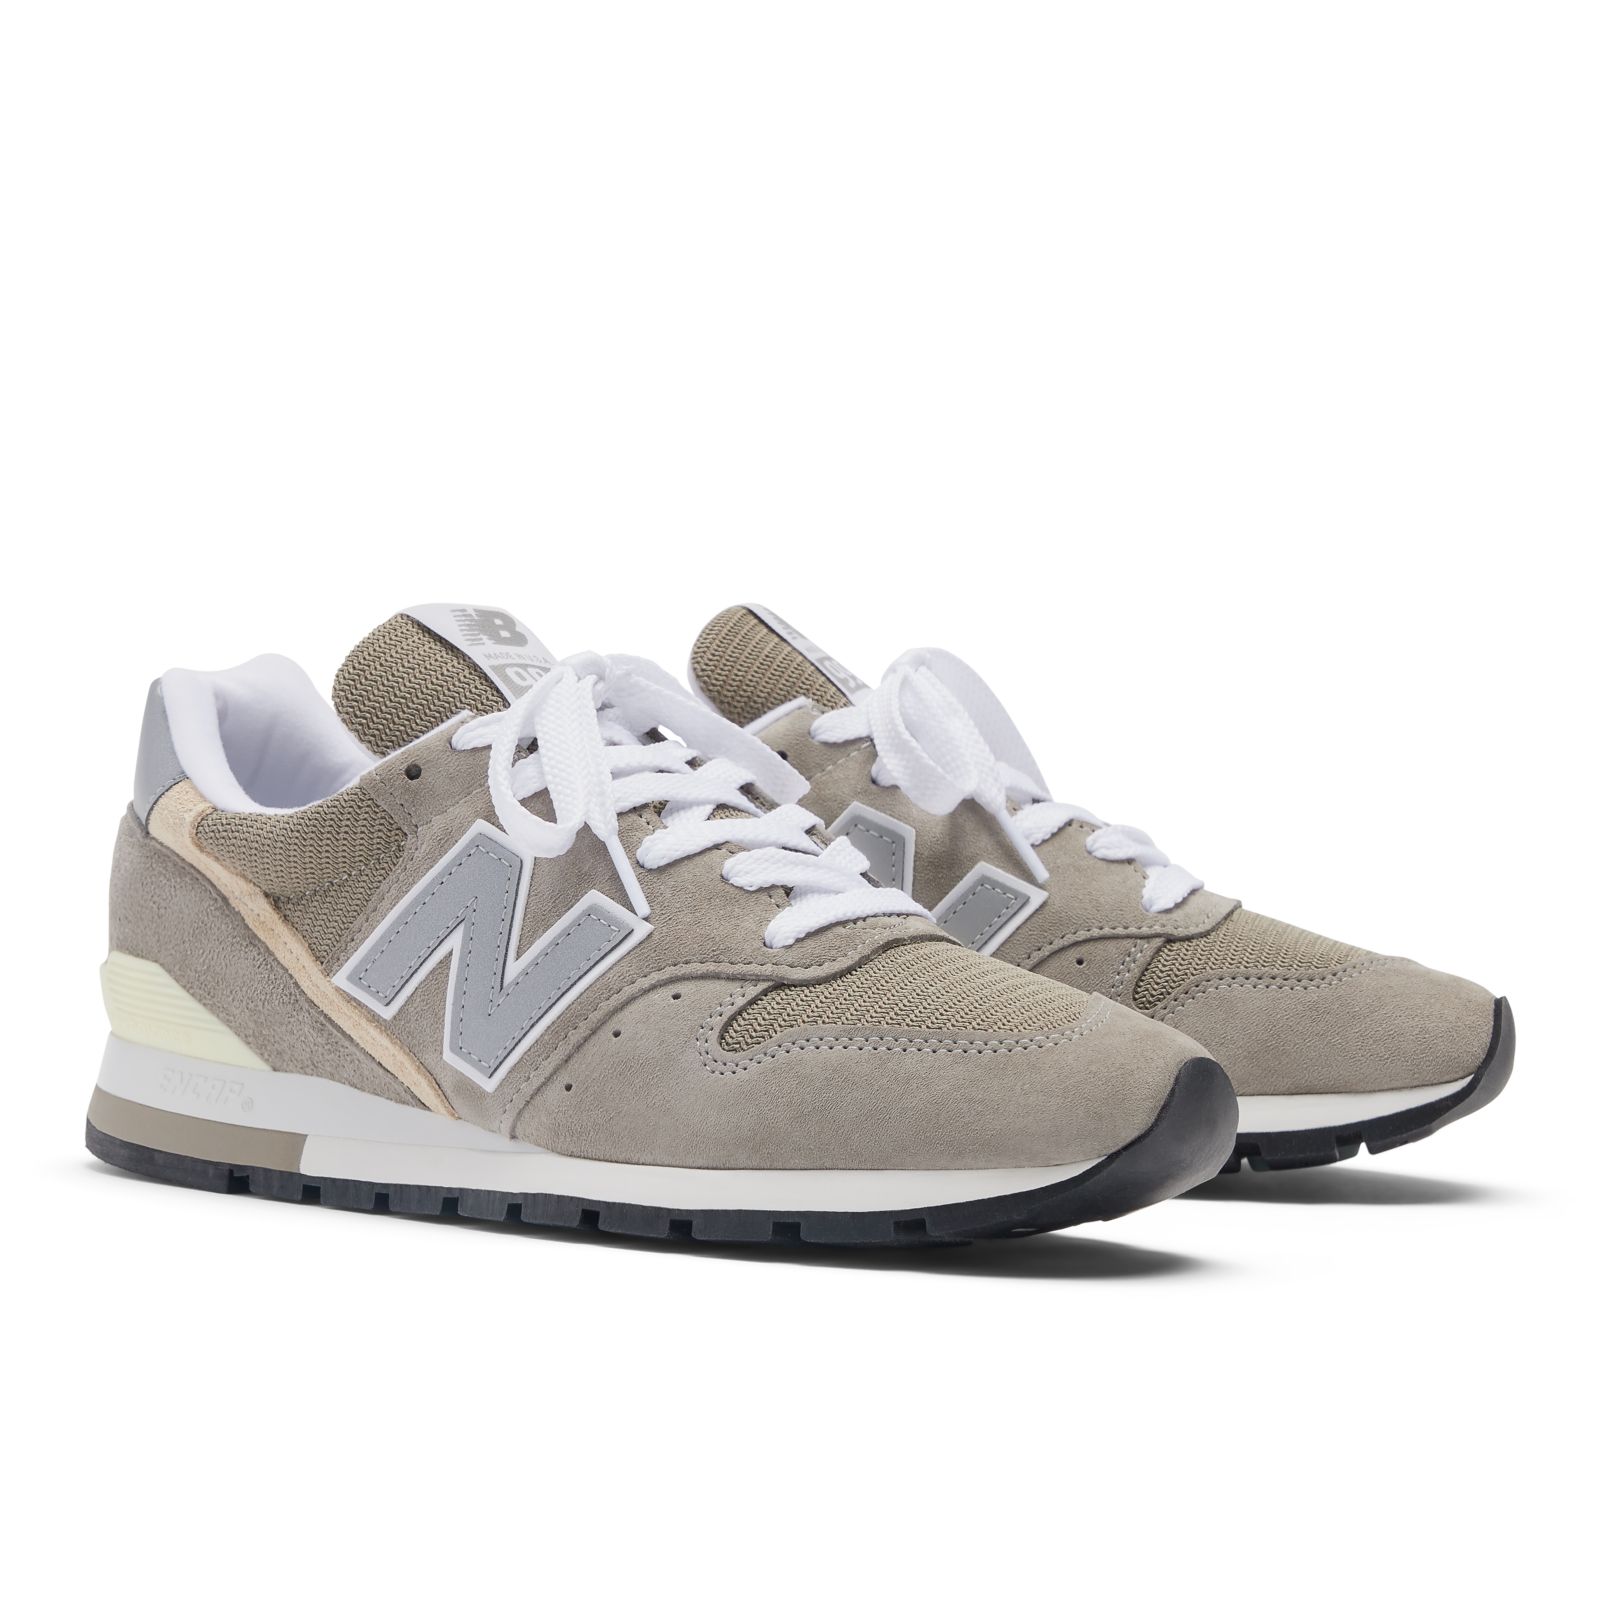 Unisex Made in USA 996 Core Shoes - New Balance